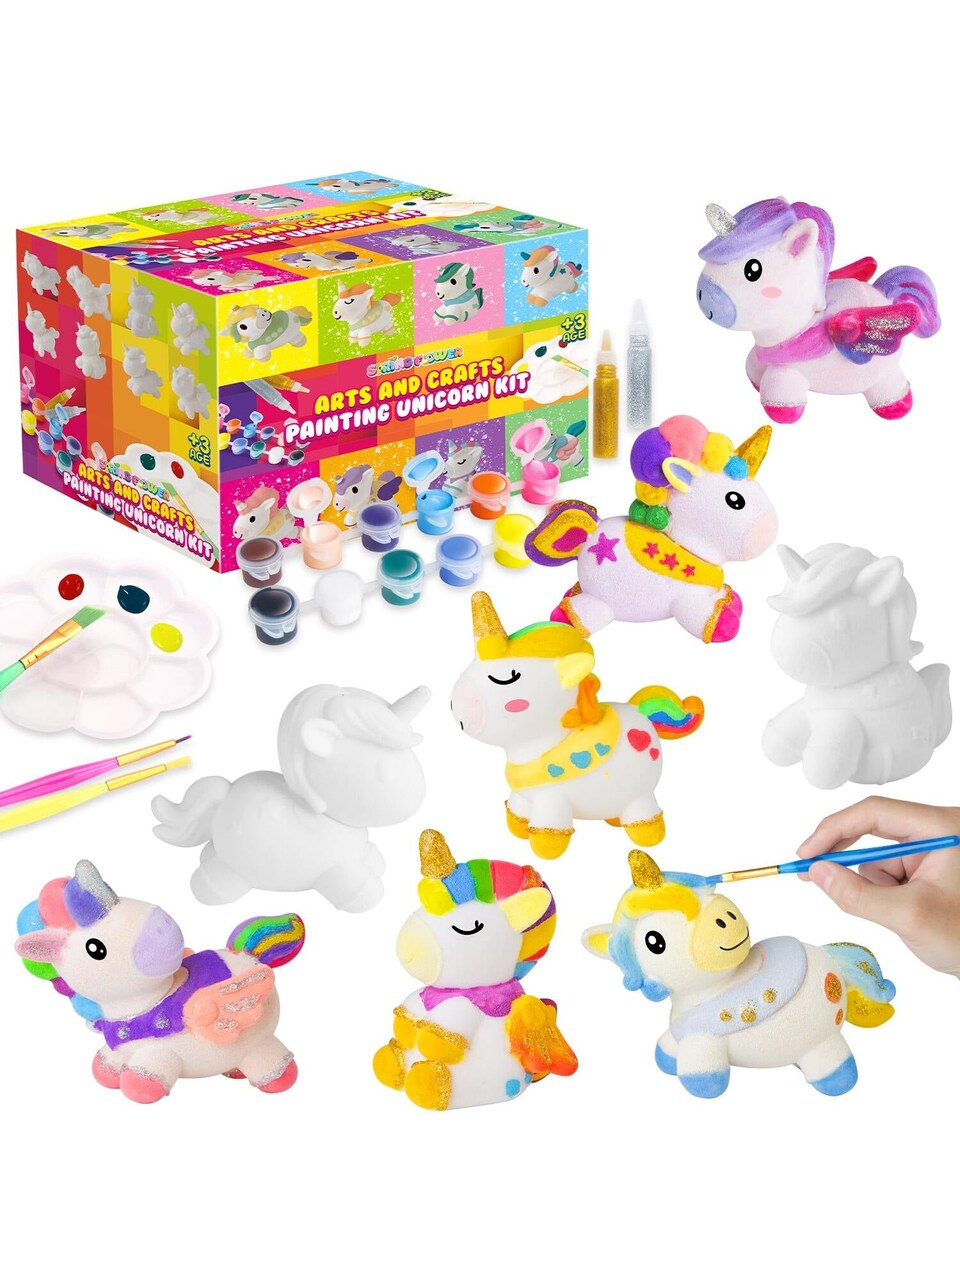 Unicorn Gift Toys for 3 4 5 6 7 8 Years Old Girls - Unicorn Arts and Crafts  Painting Kit Including 8 Cute Looking Unicorn Figures, DIY Creative Toy  Gift for Kids